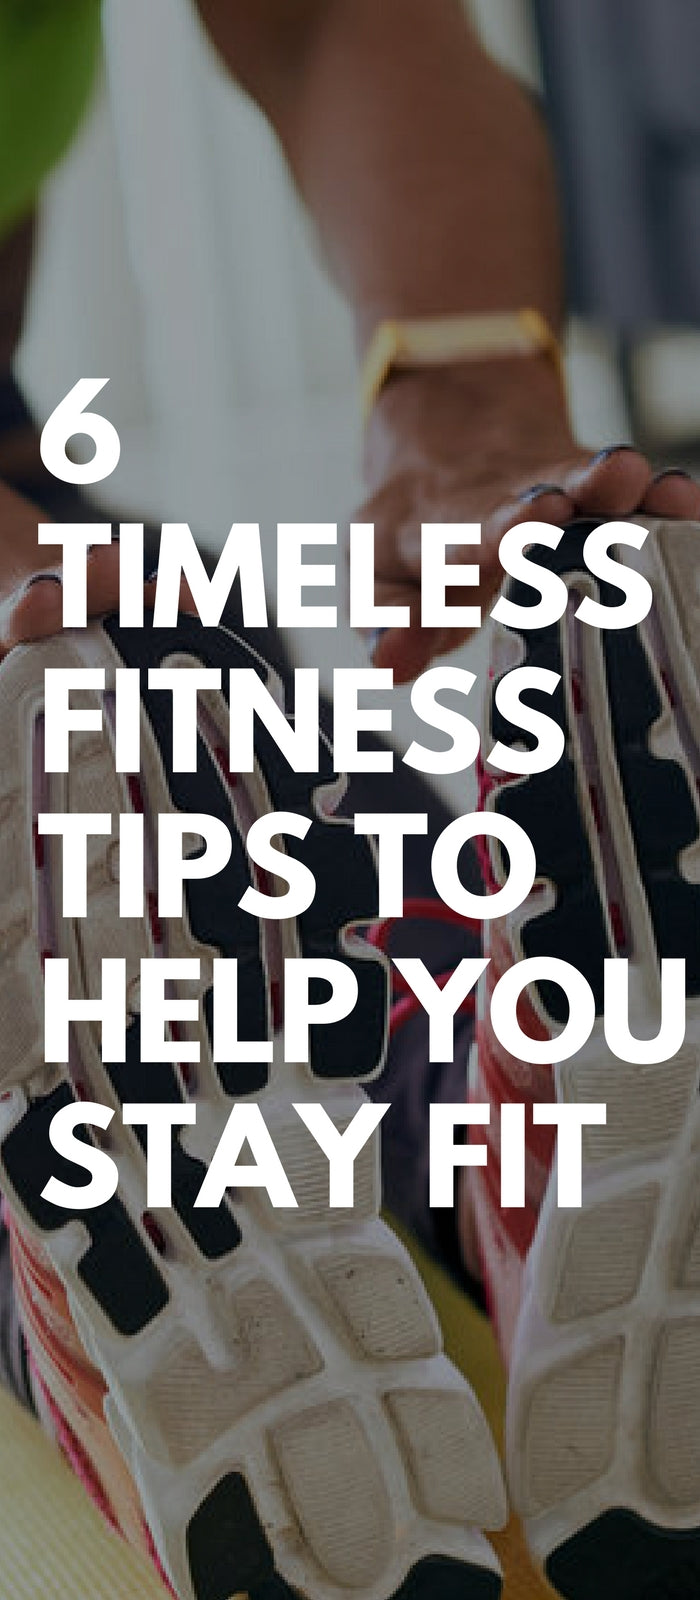 6 Timeless Fitness Tips To Help You Stay Fit